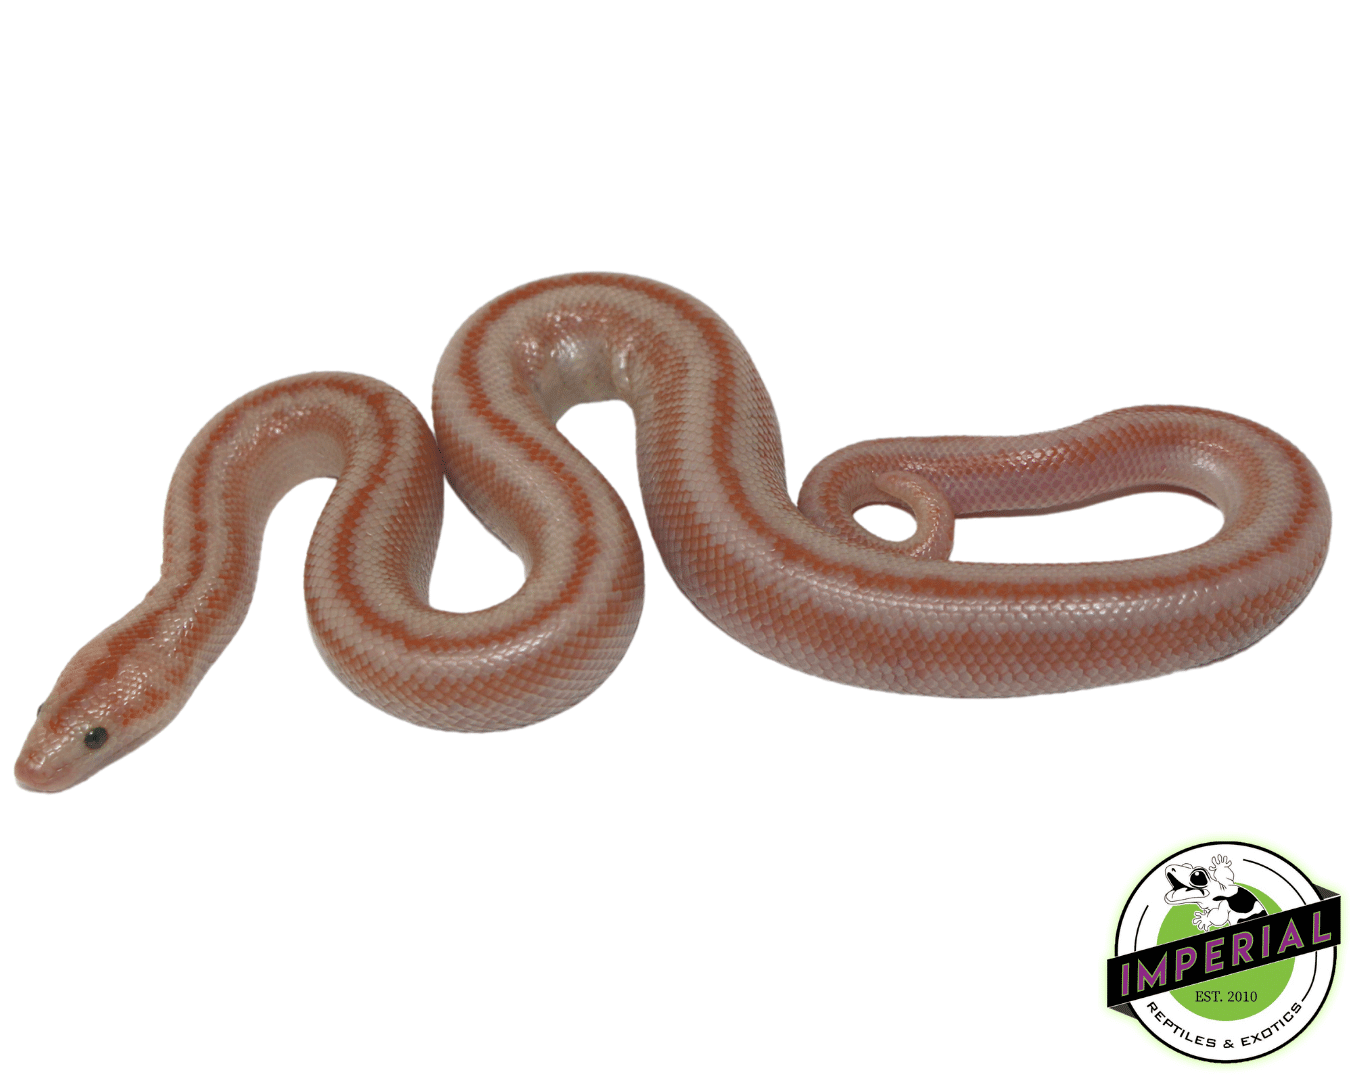 san matias boa for sale, buy reptiles online at cheap prices